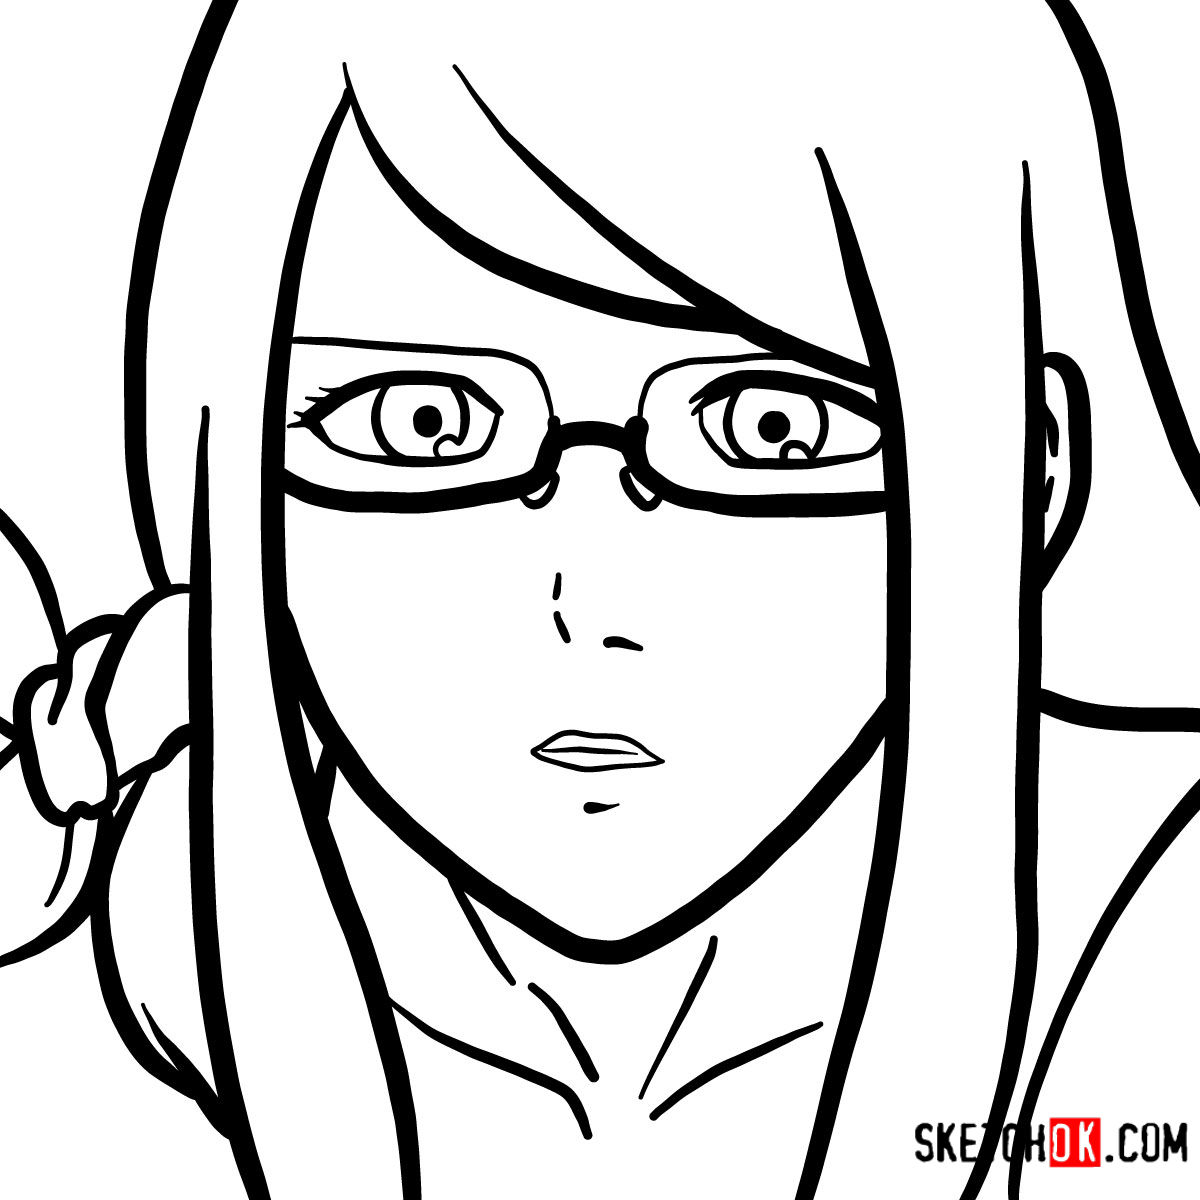 How to draw Rize Kamishiro's face